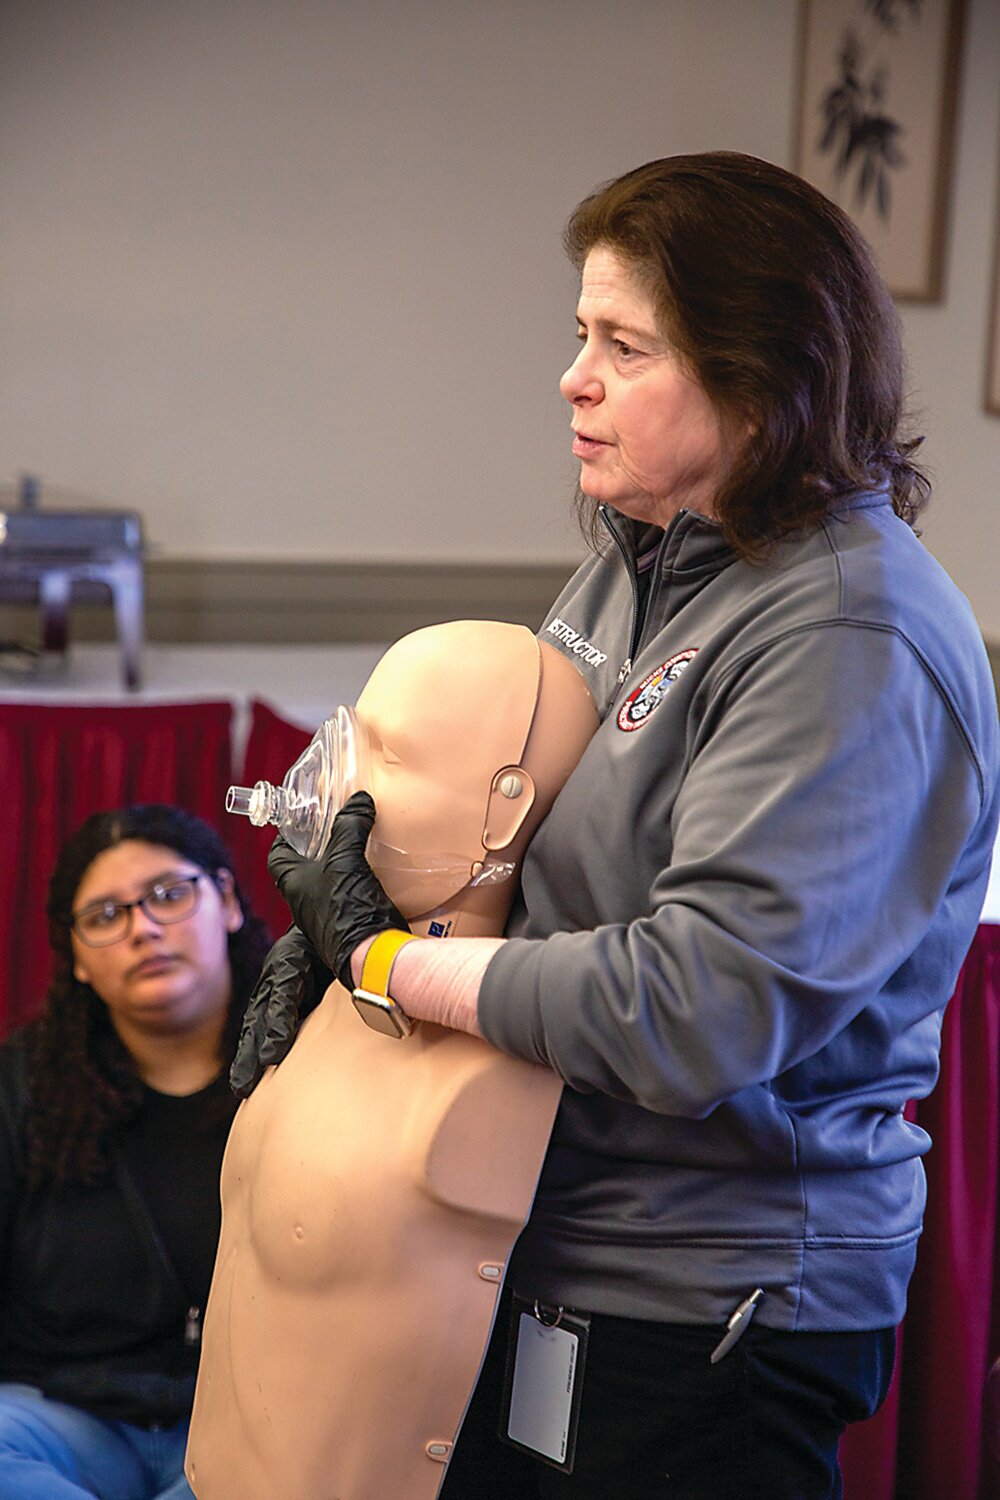 Instructor Gail Keagy leads a CPR training session for students at Middle Bucks Institute of Technology.